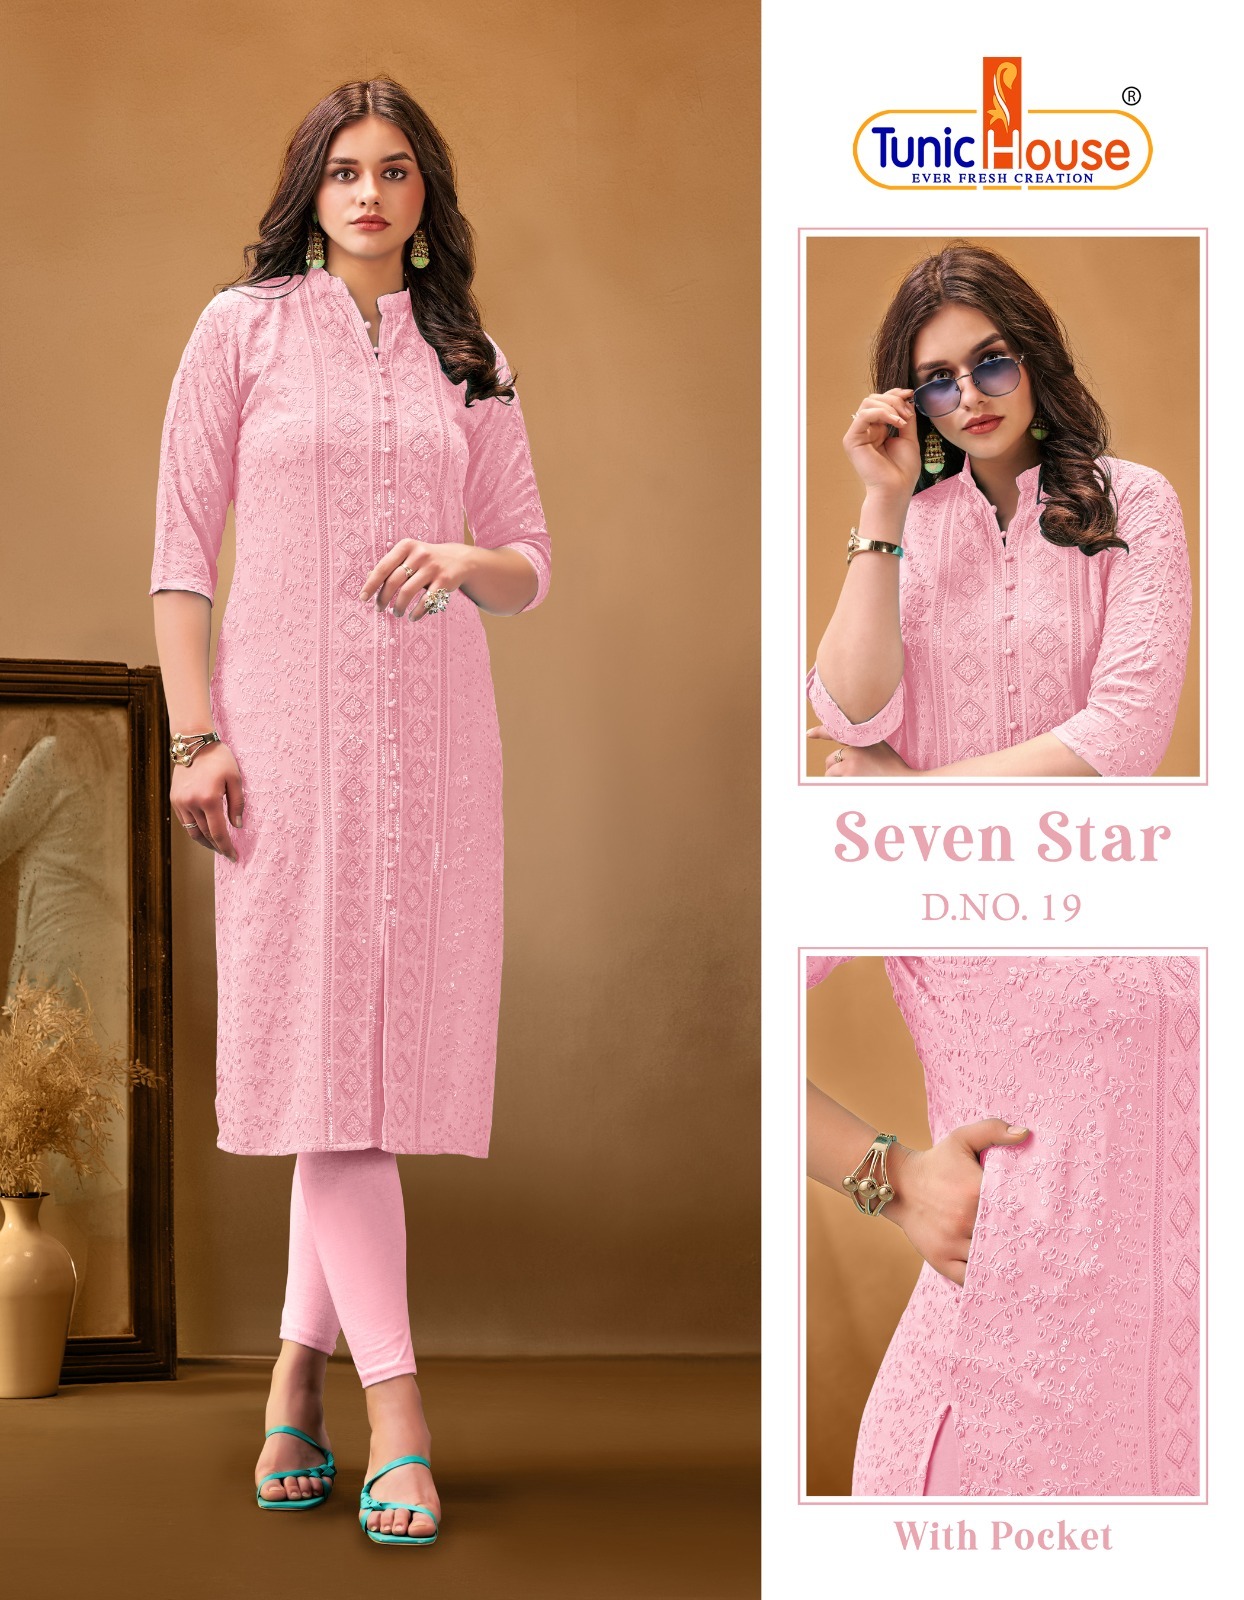 Tunic Houes 7 Star collection 6